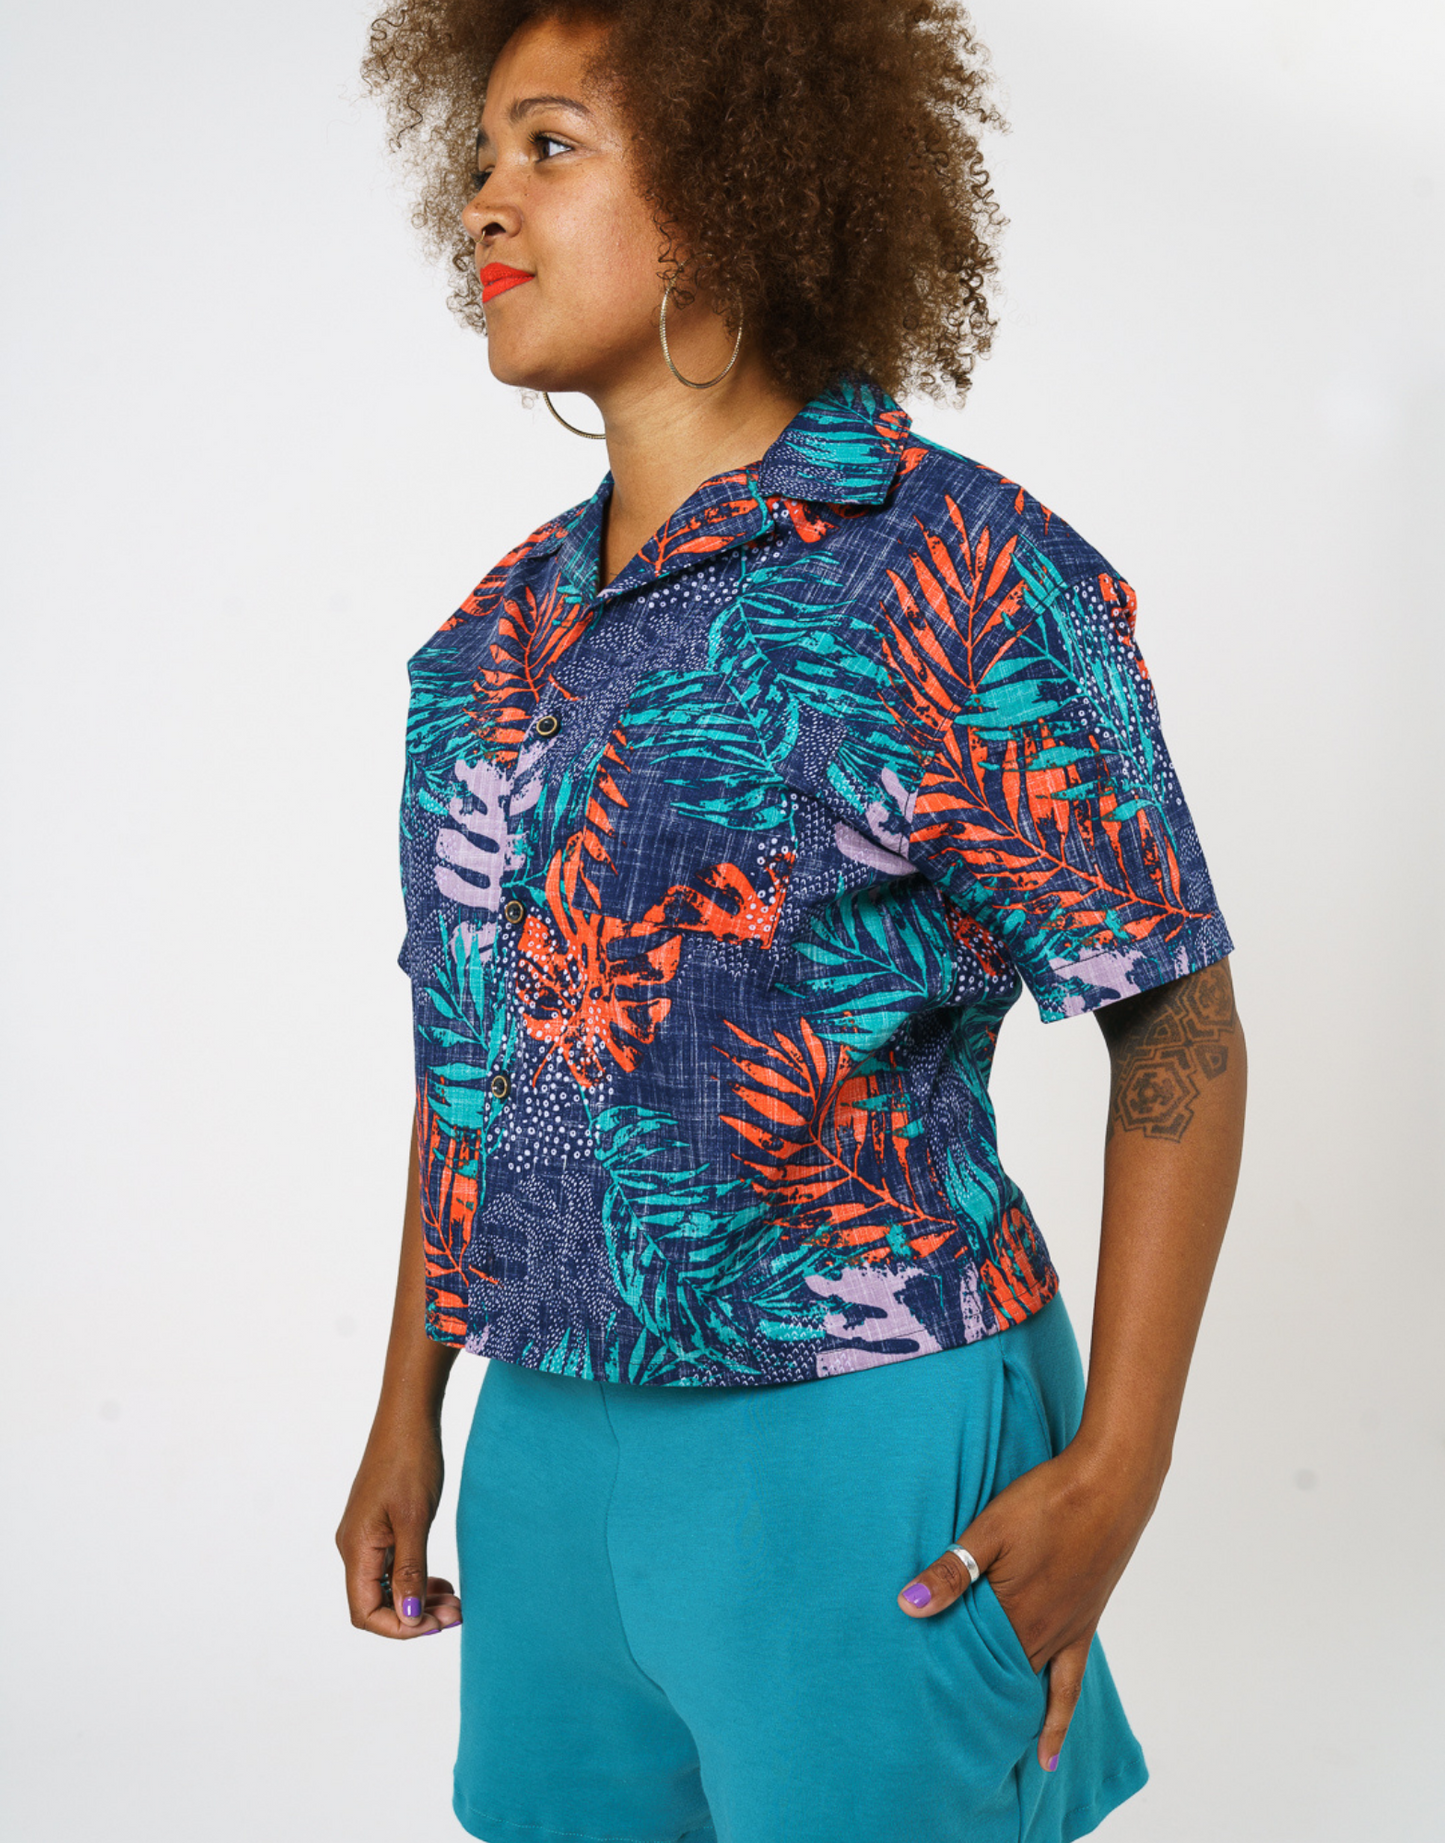 Close up of our digitally printed cotton womens shirt in bright teal and orange leaf print and revere collar details. Paired with our teal Jersey shorts and styles with Bright trainers and socks. 